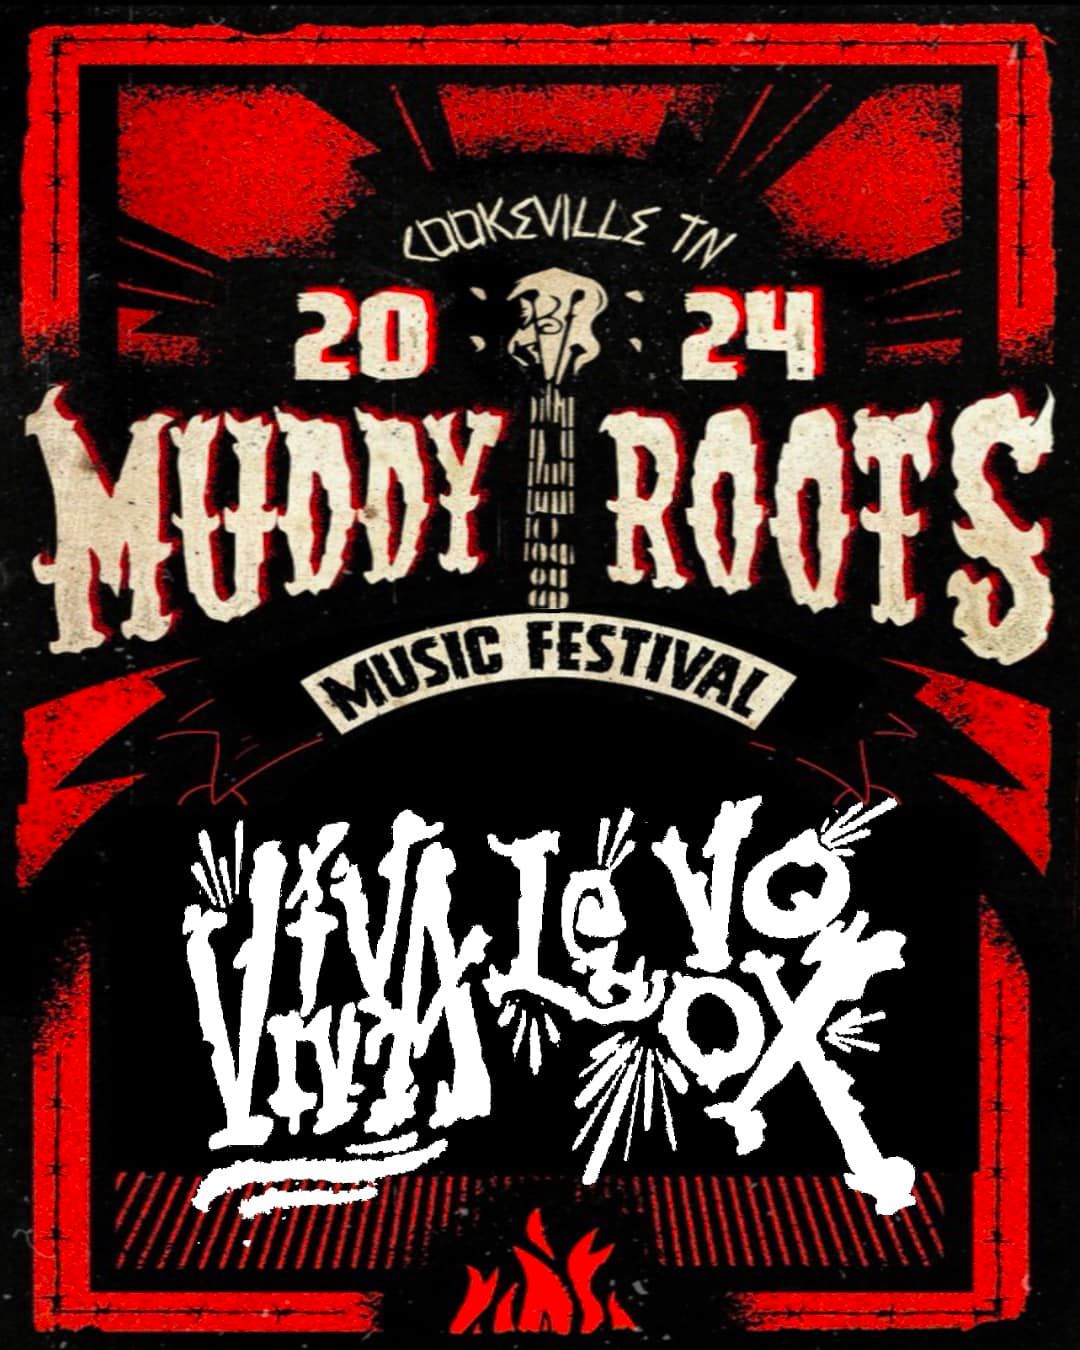 Viva Le Vox at Muddy Roots Music Festival